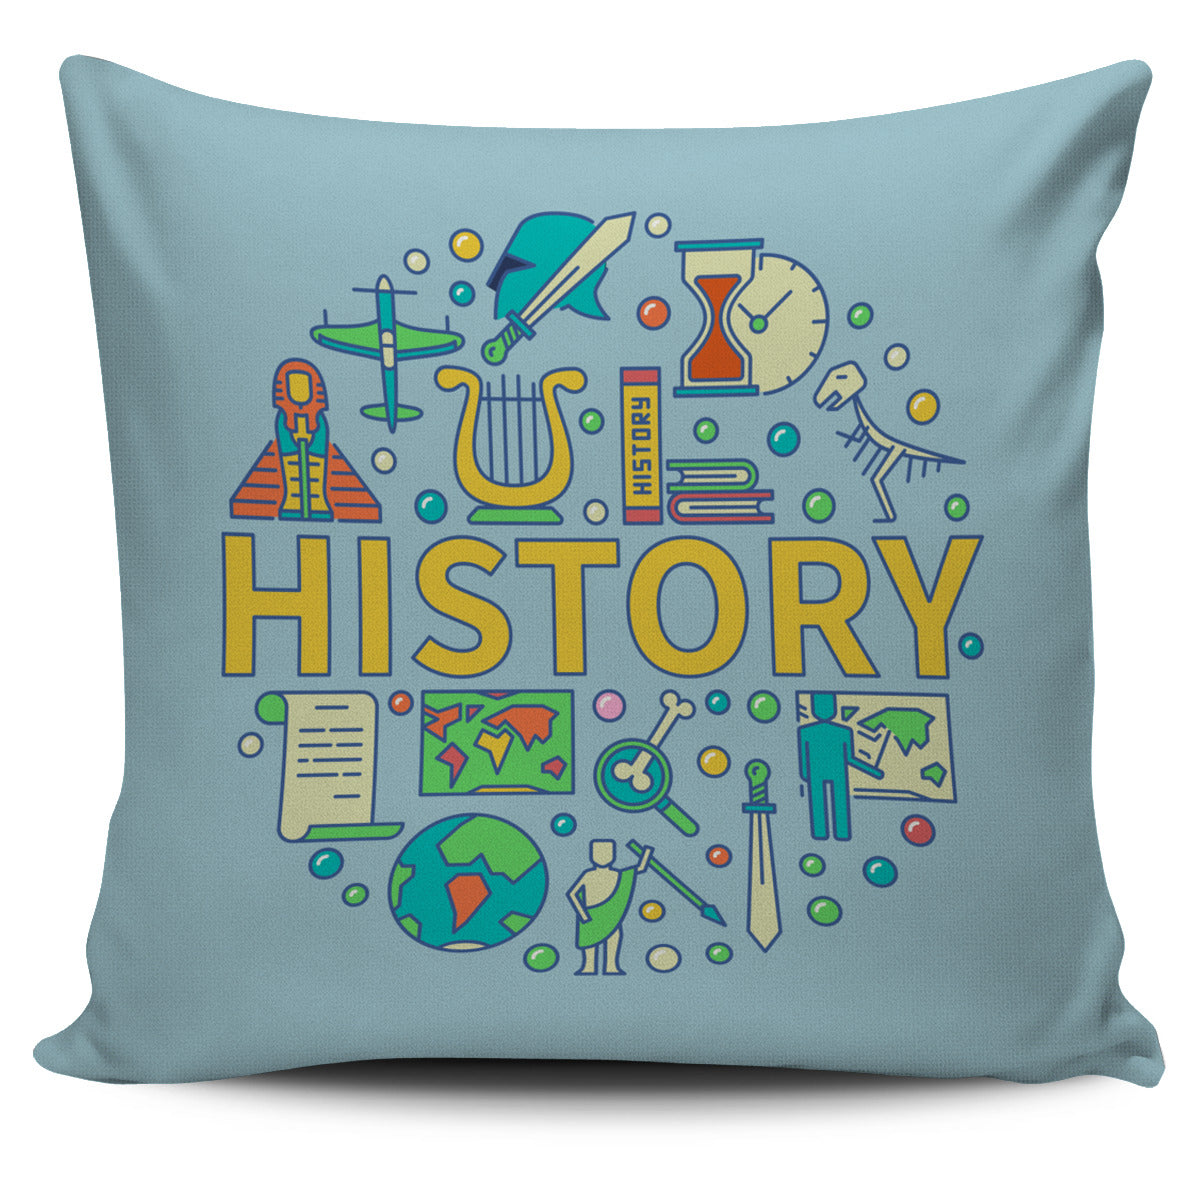 History Pillow Cover